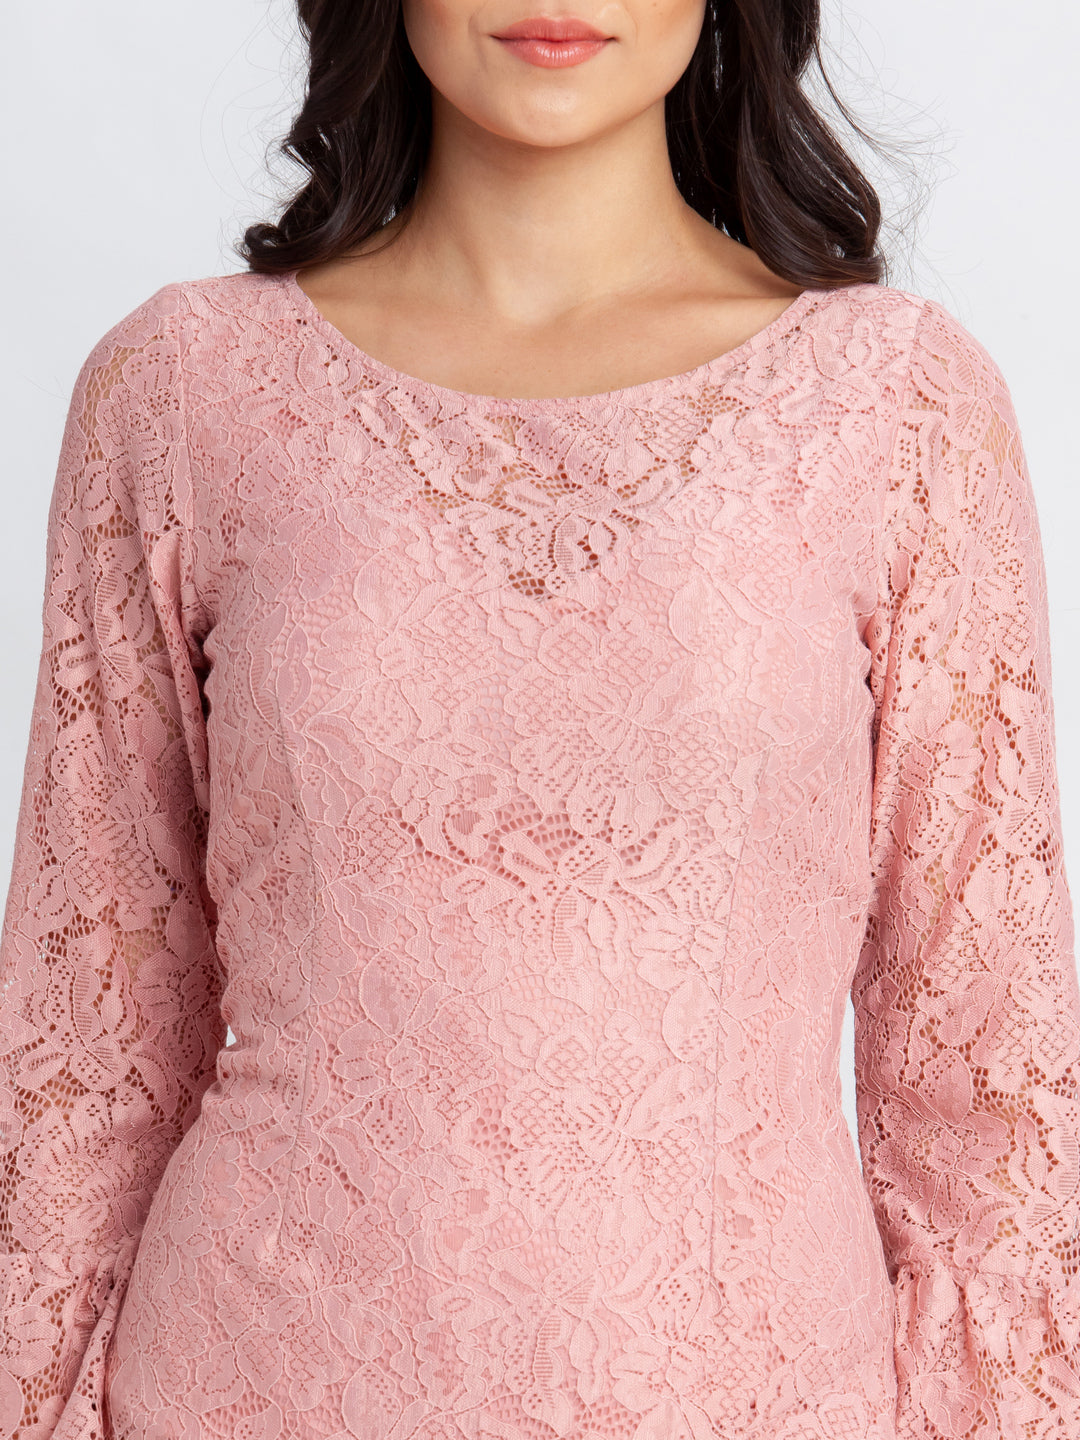 Pink Lace Flared Sleeve Short Dress For Women